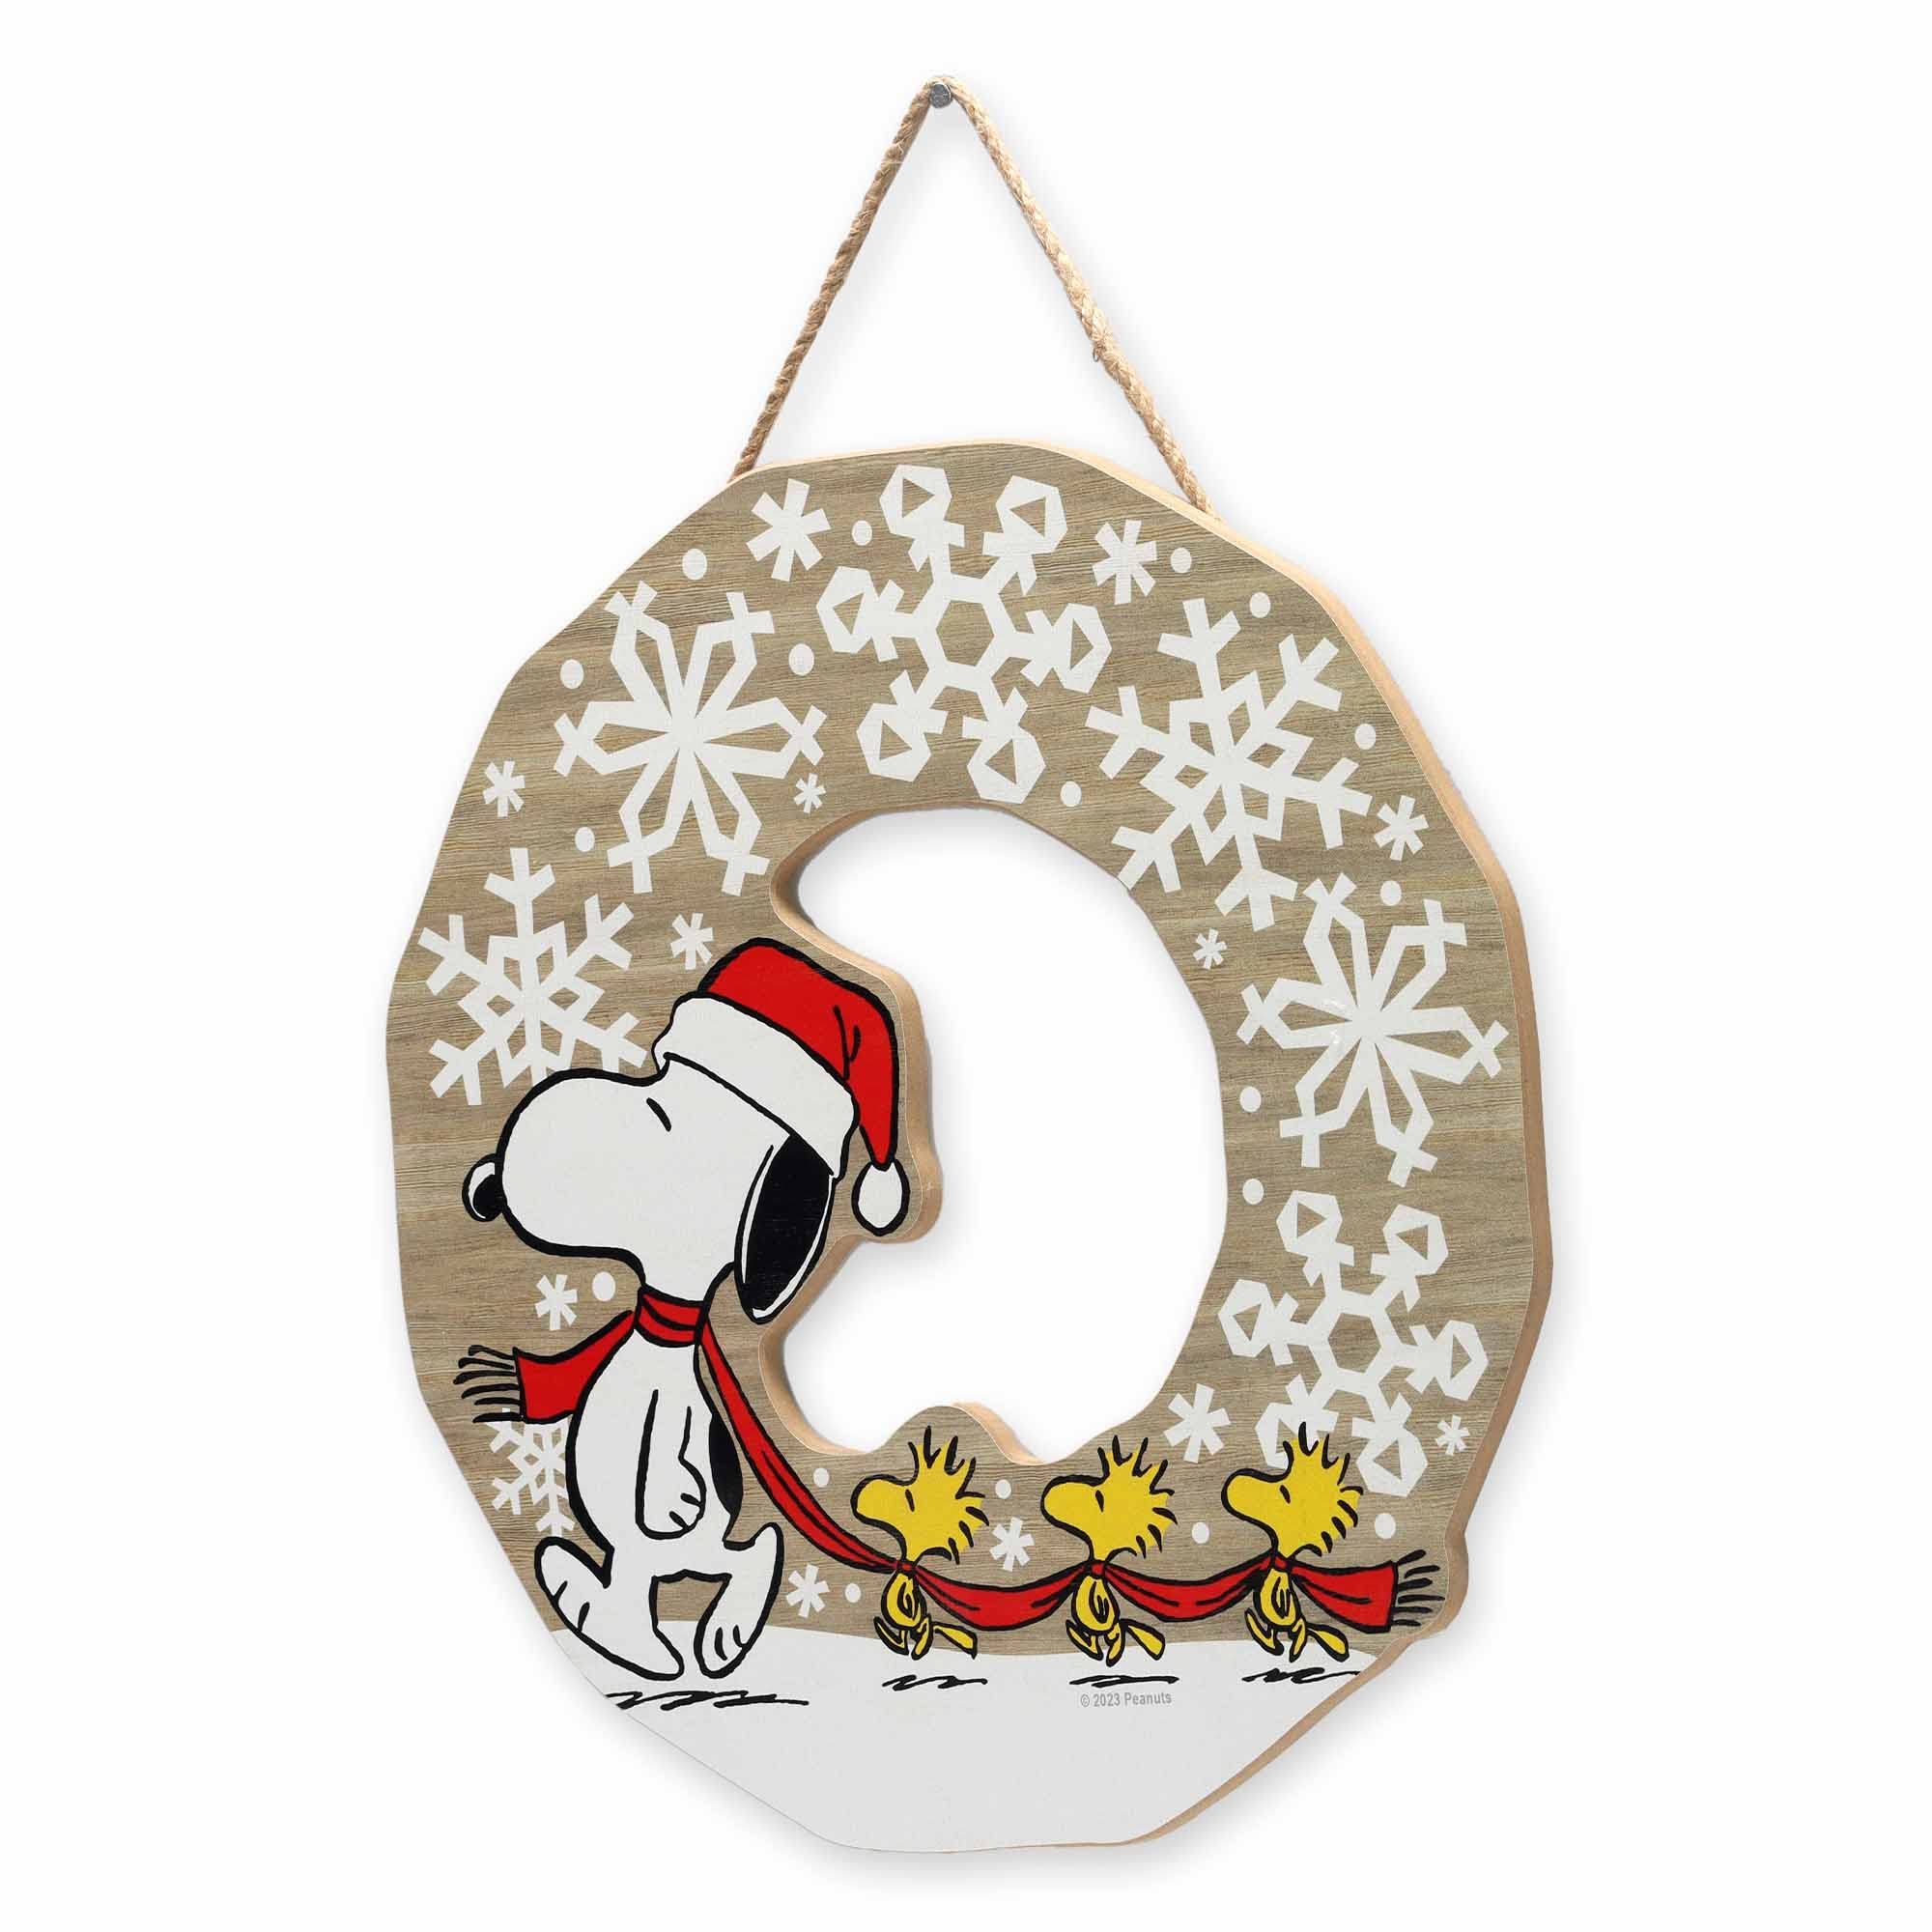 Open Road Brands Peanuts Snoopy Snowflake Wreath Hanging Wood Wall Decor - Nostalgic Peanuts Christmas Sign for Holiday Home Decorating